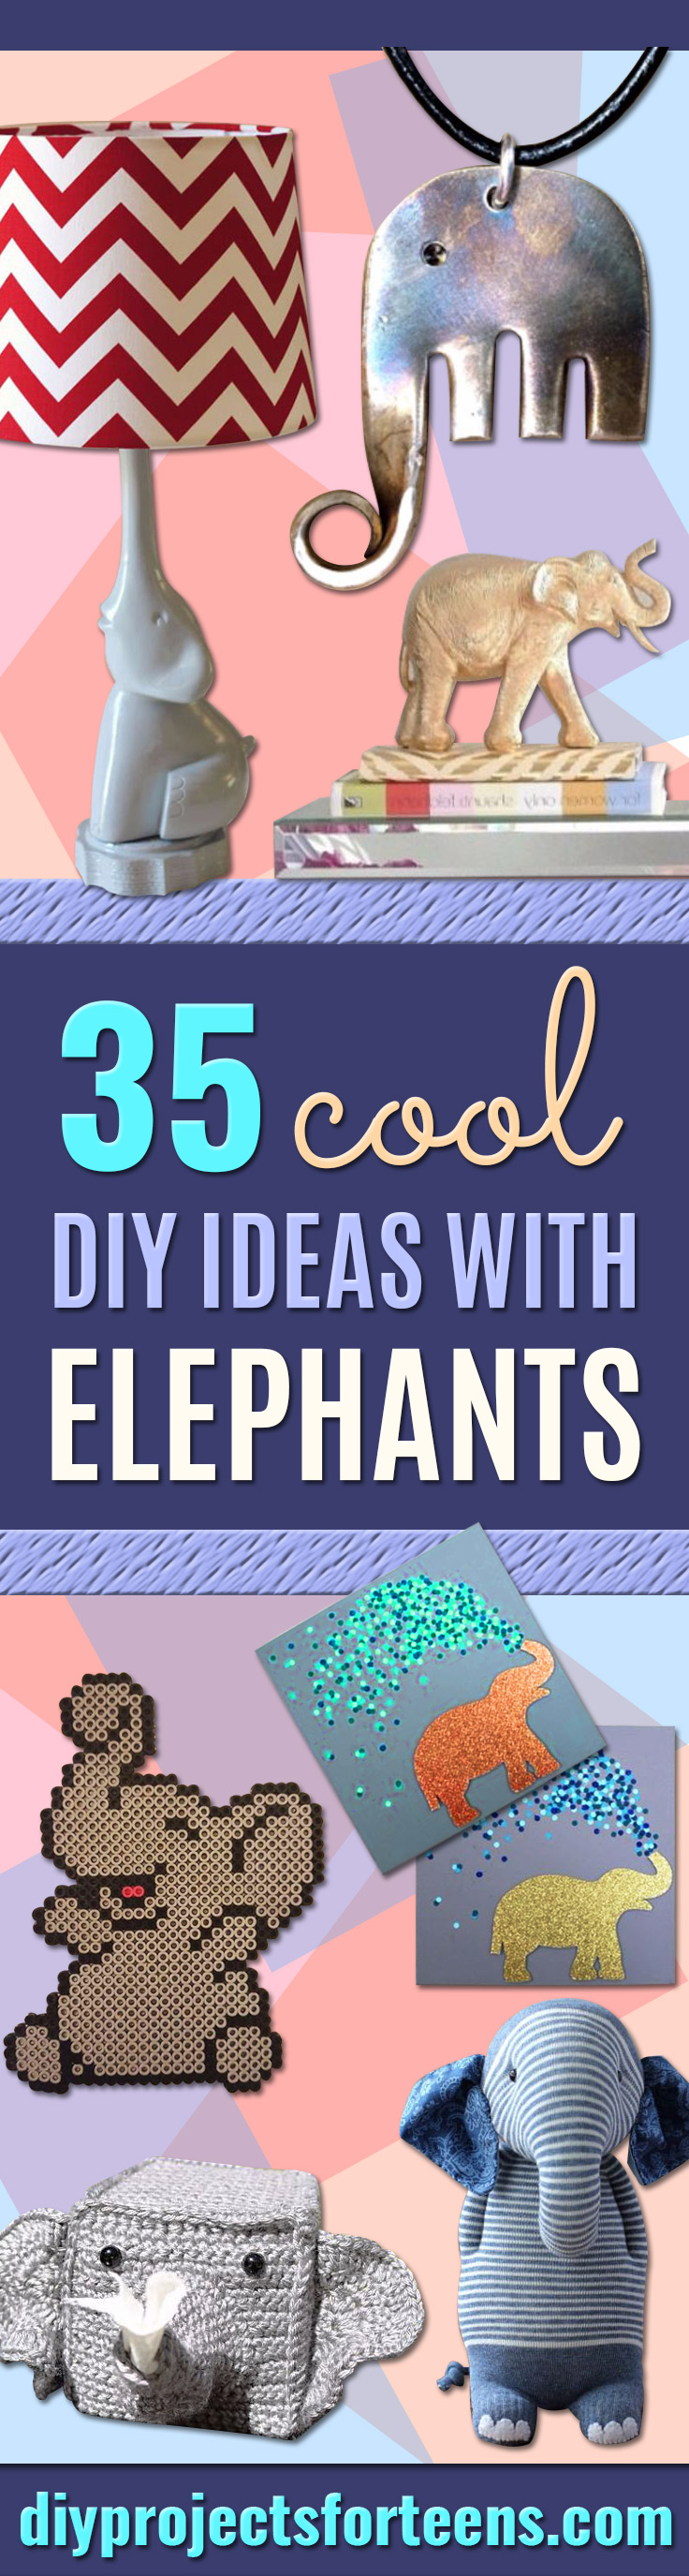 DIY Ideas With Elephants - Easy Wall Art Ideas, Crafts, Jewelry, Arts and Craft Projects for Kids, Teens and Adults- Simple Canvases, Throw Pillows, Cute Paintings for Nurseries, Dollar Store Crafts and Fun Dorm Room and Bedroom Decor - Tutorials for Crafty Ideas Decorated With an Elephant http://stage.diyprojectsforteens.com/diy-ideas-elephants